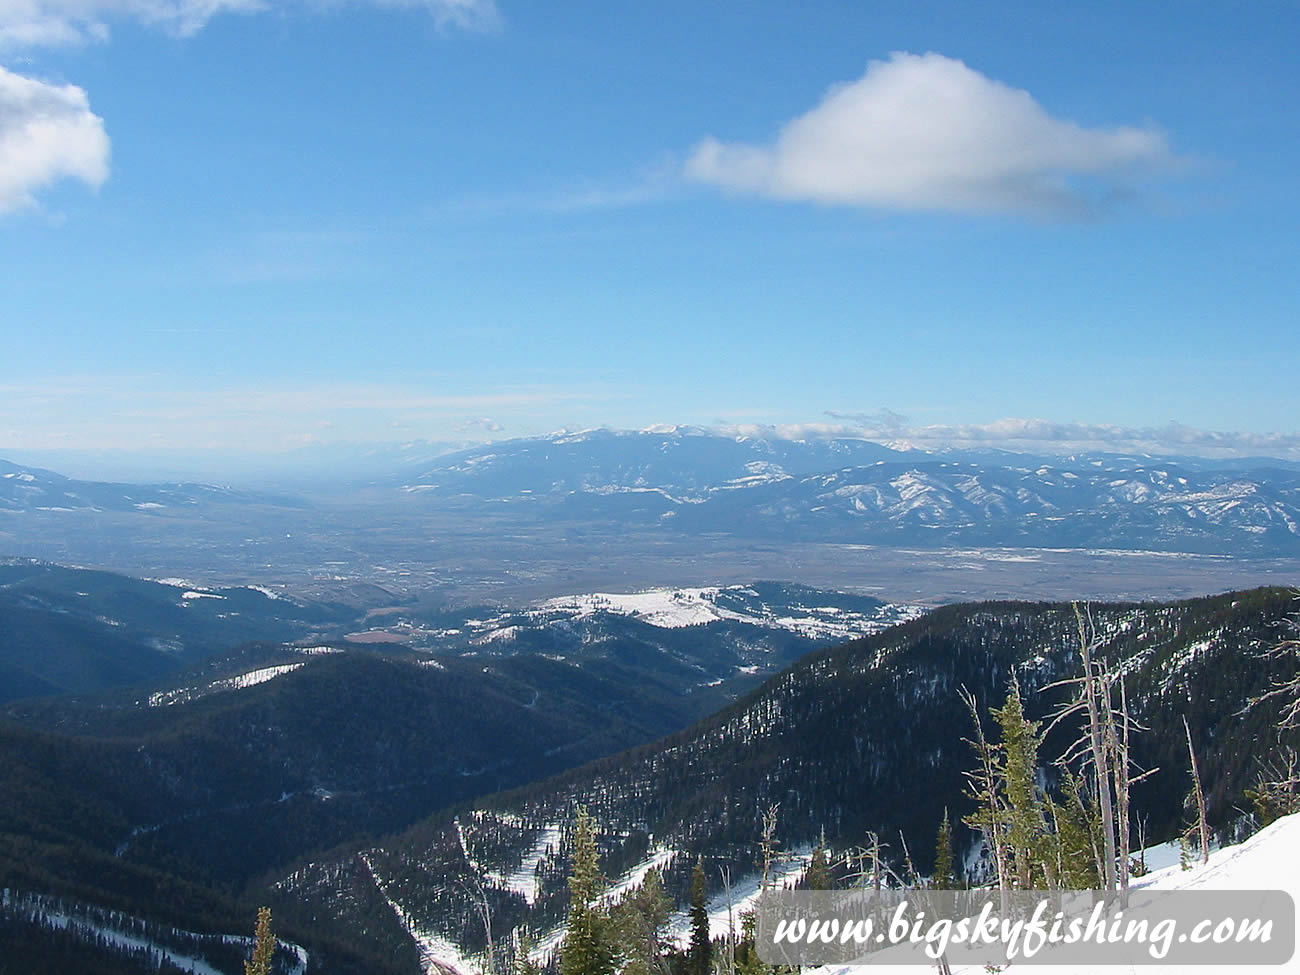 View from Near the Summit at Montana Snowbowl